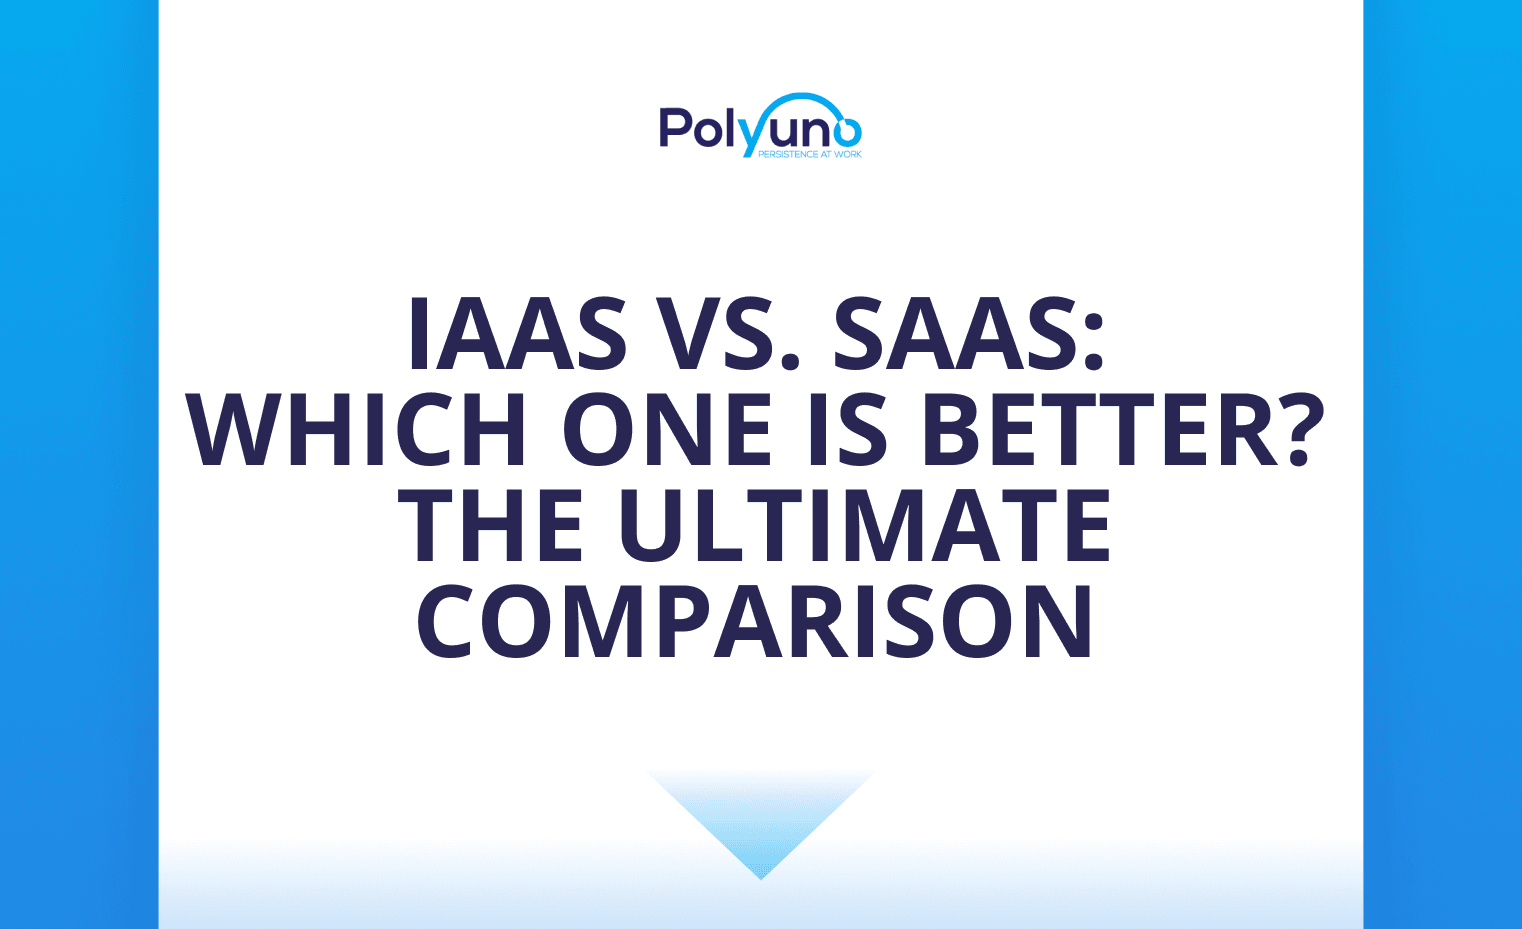 IaaS Vs. SaaS: Which One is Better? The Ultimate Comparison